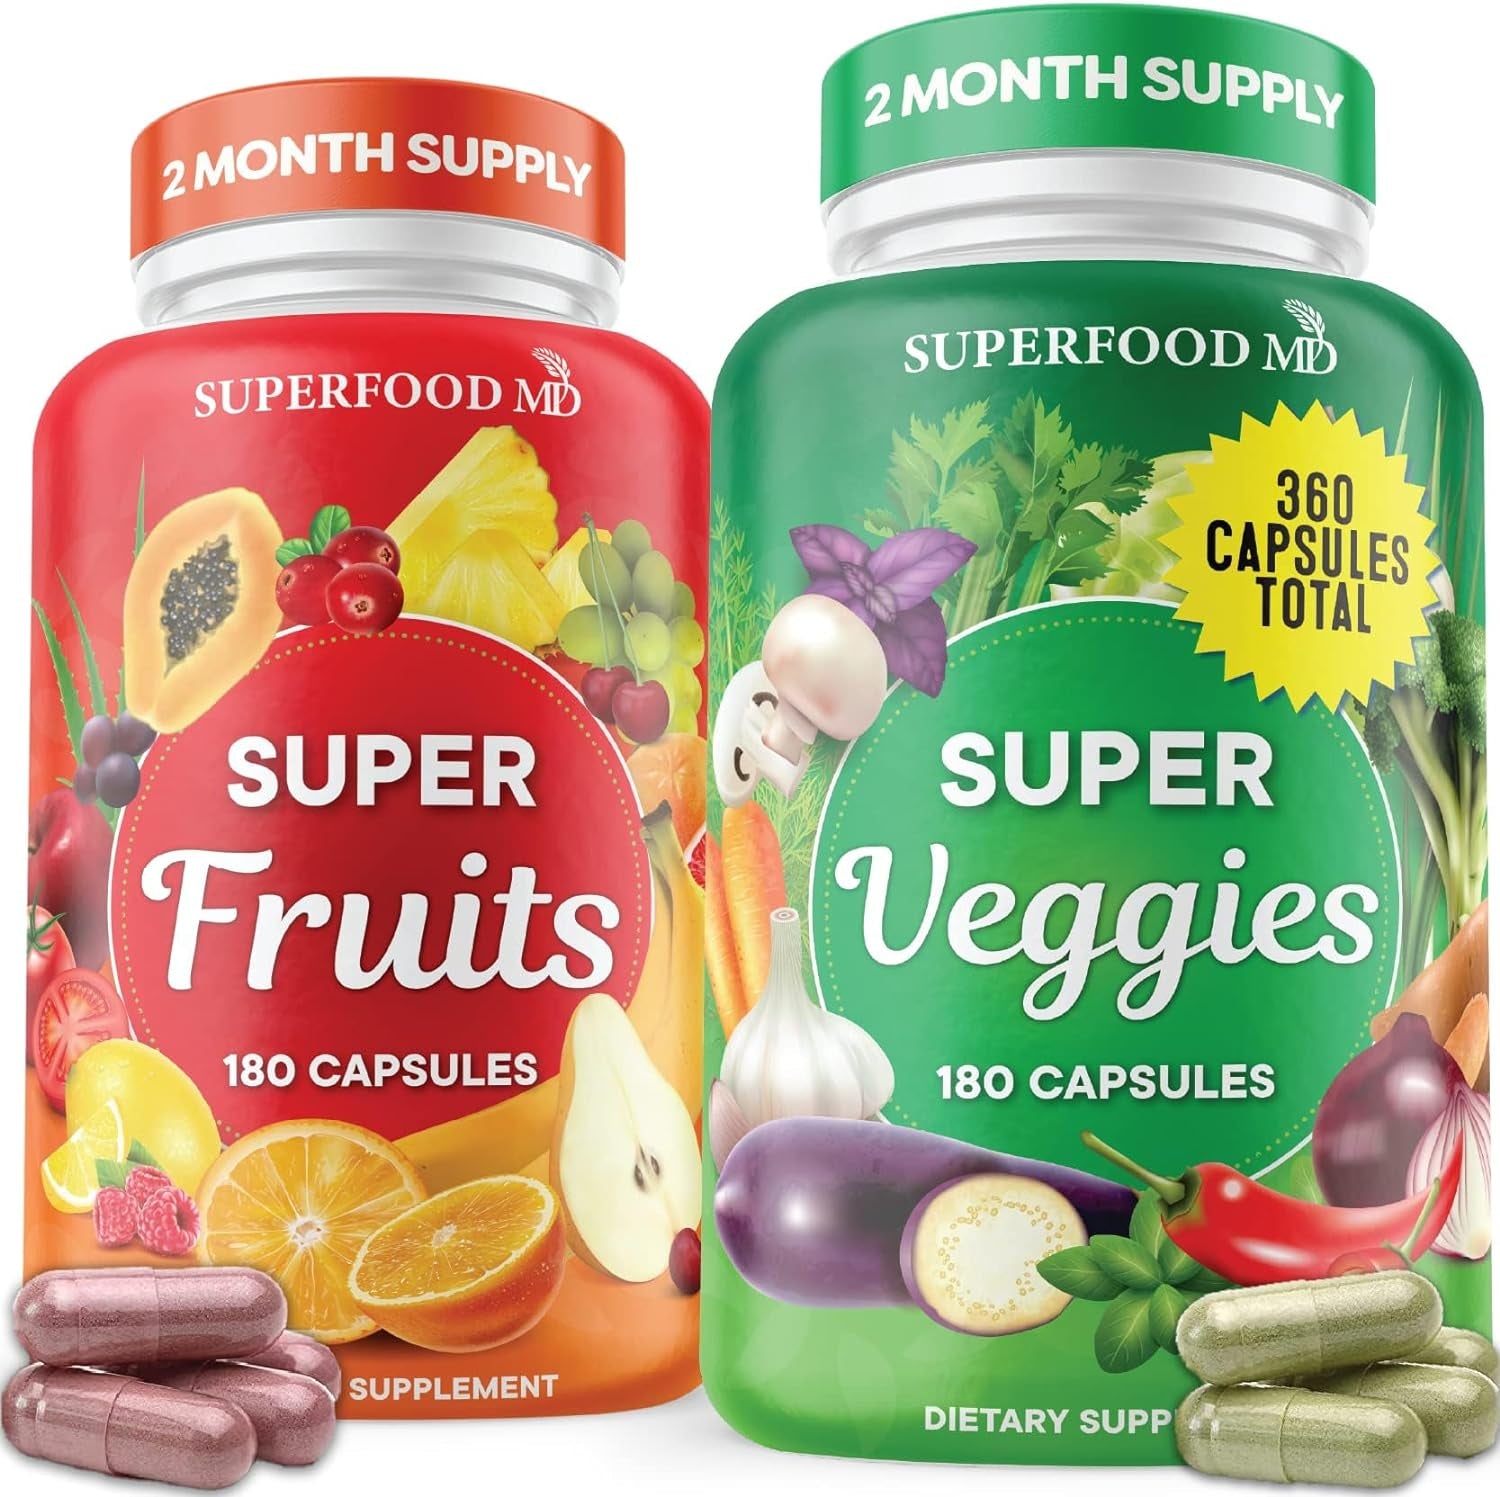 "Superfood Boost - 360 Whole Super Fruit and Vegetable Supplements for Natural Energy - 180 Count x 2"